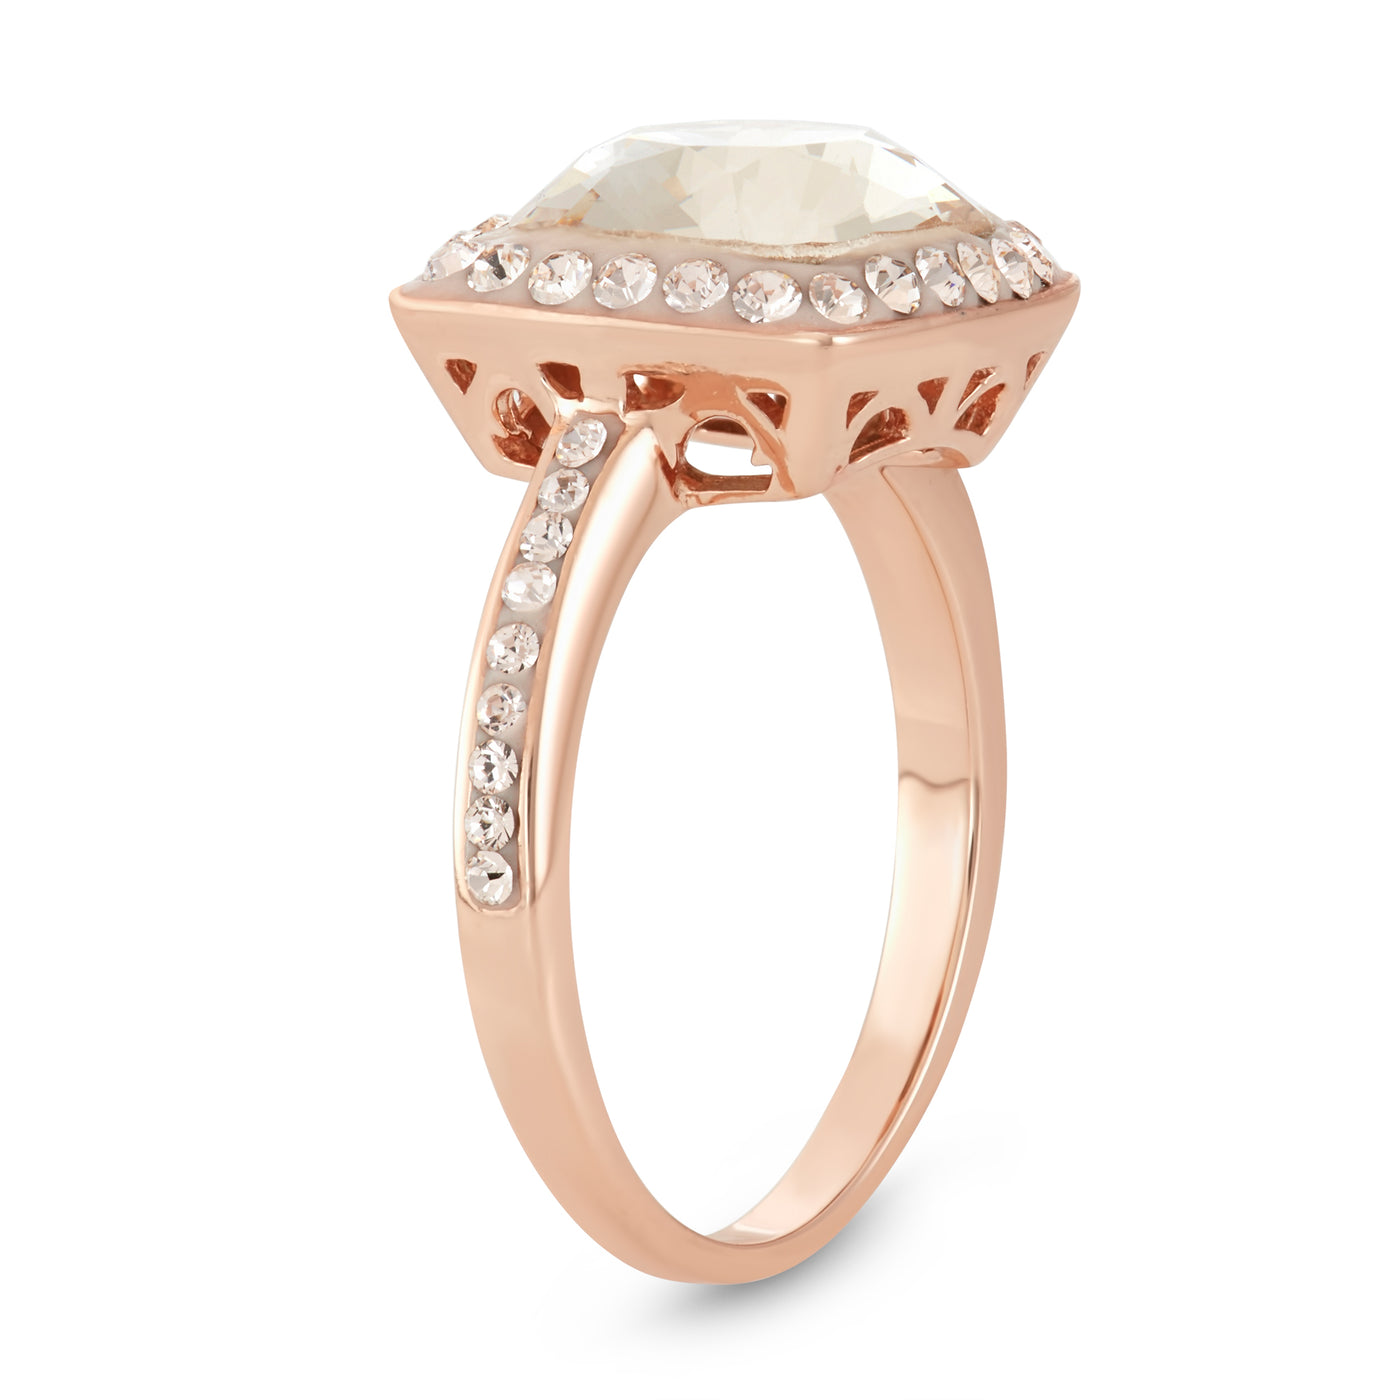 Rose Gold Plated Sterling Silver Ring With Light Silk Crystal Elements